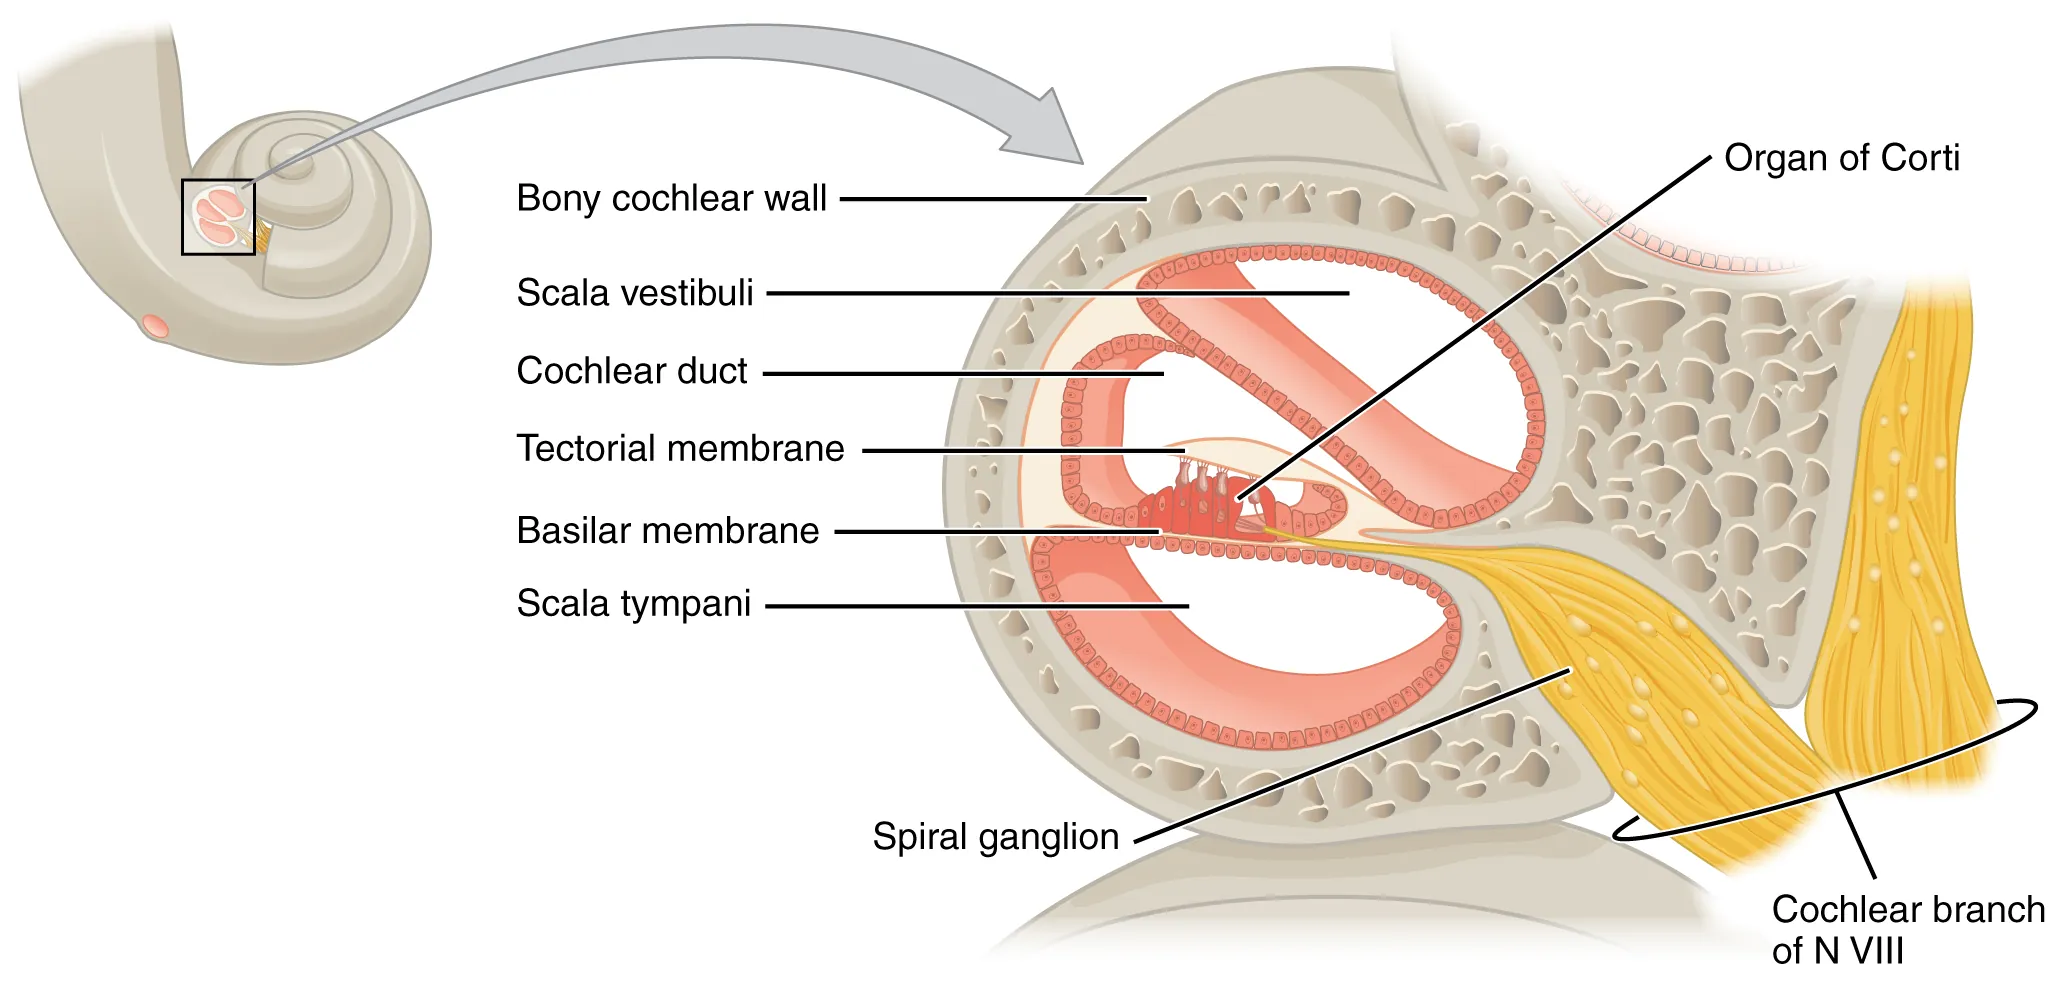 This diagram shows the structure of the cochlea in the inner ear.